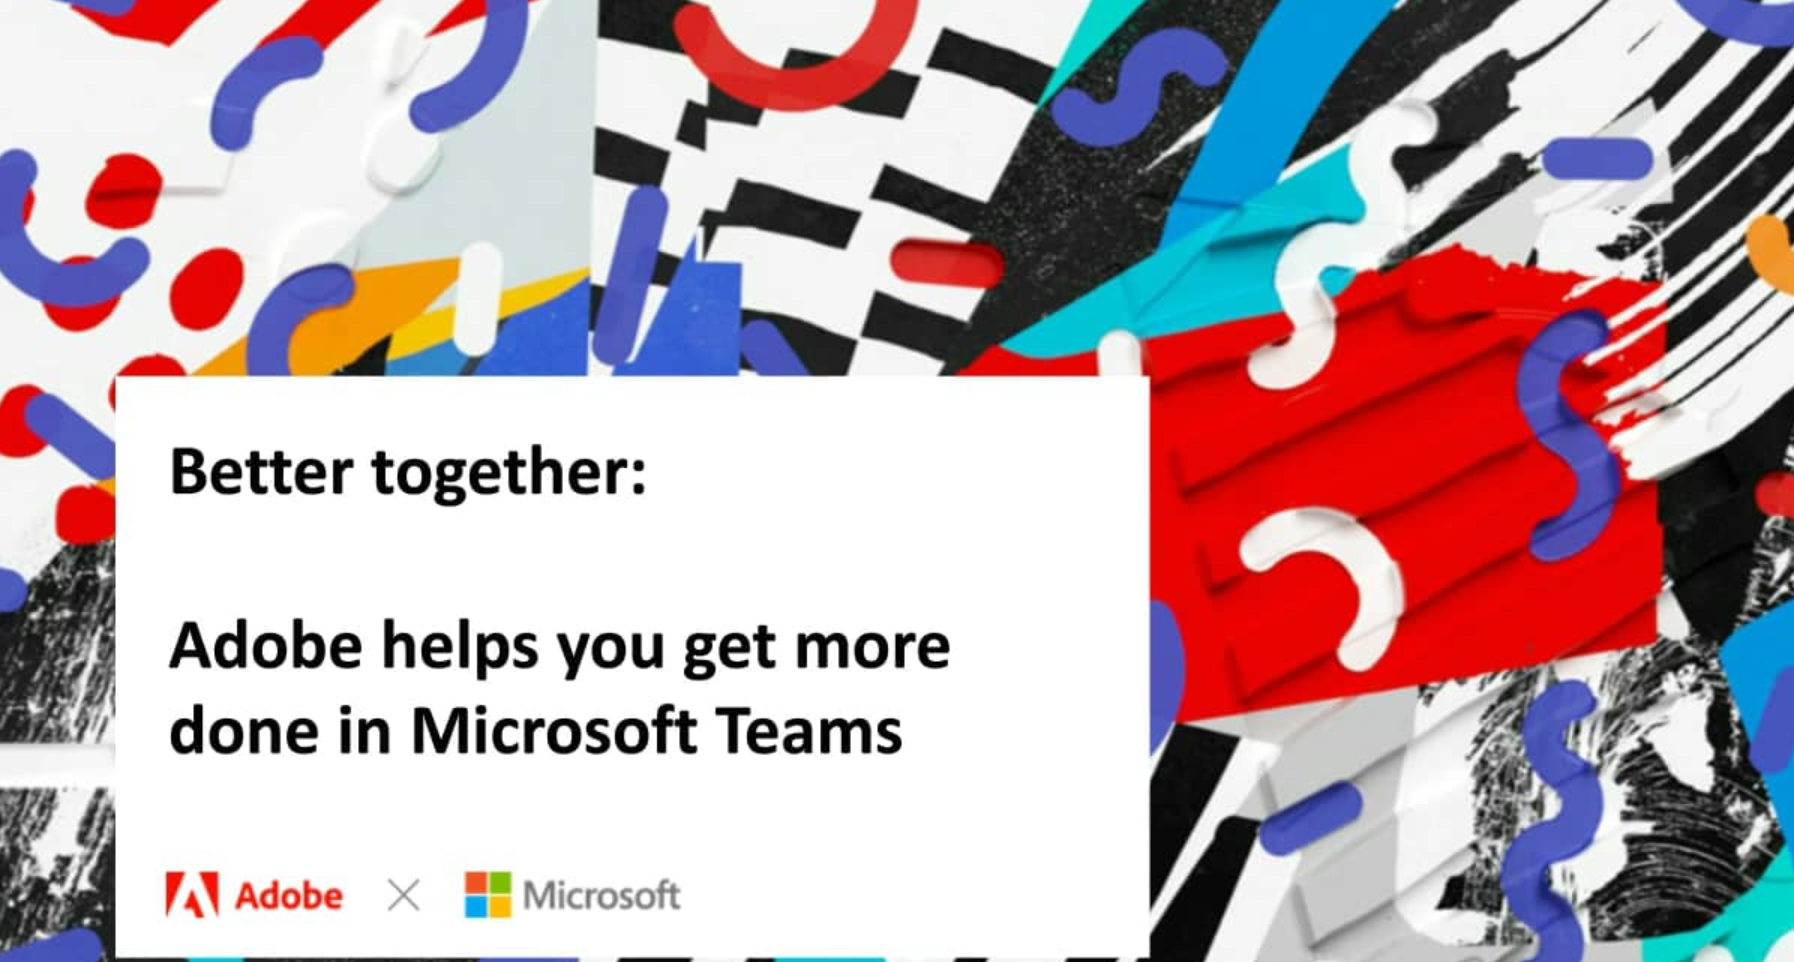 Adobe helps you get more done in Microsoft Teams